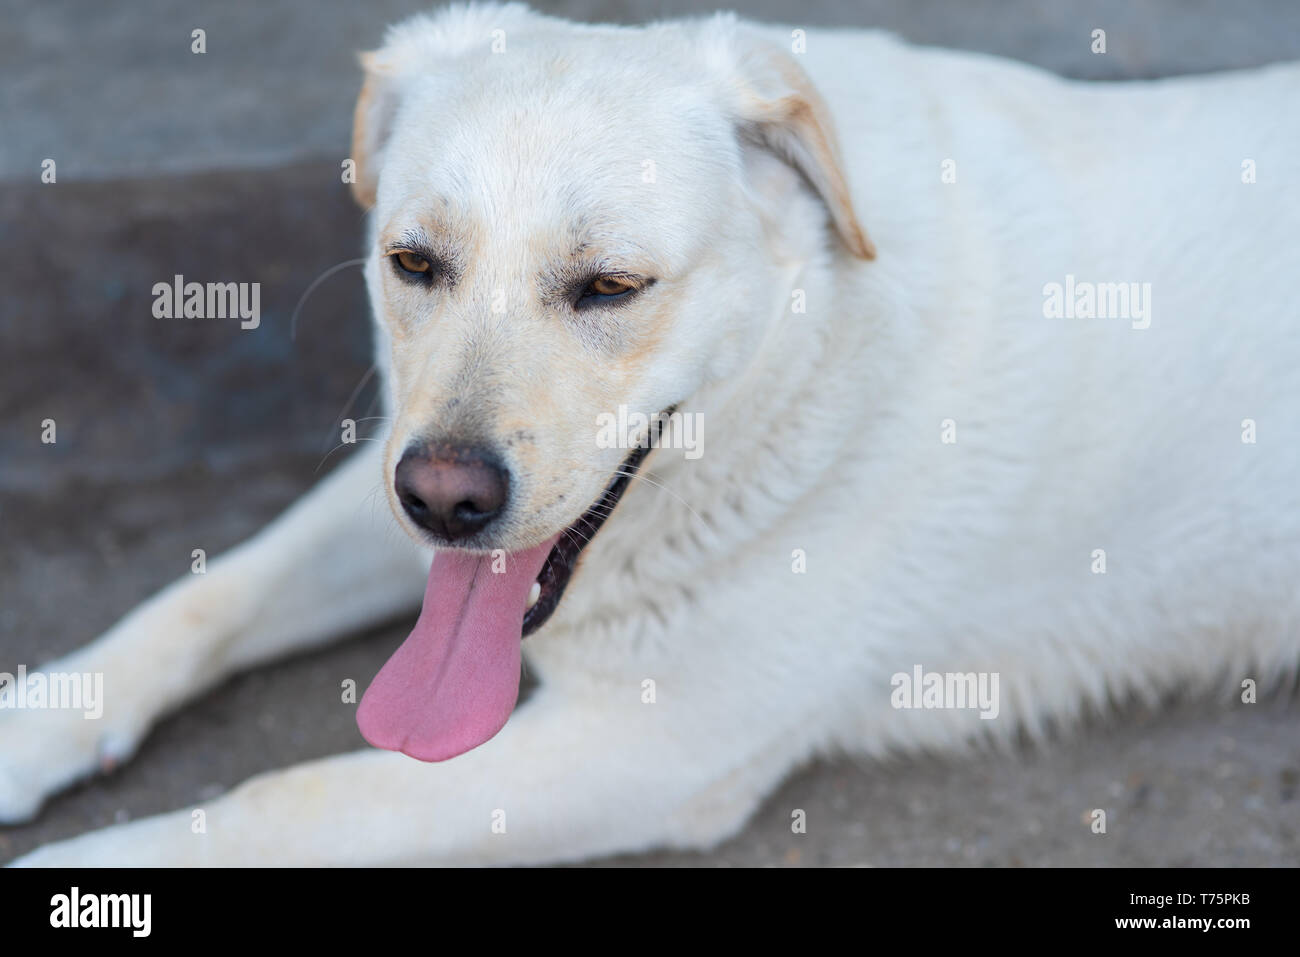 Good friend with long tongue relaxing Stock Photo